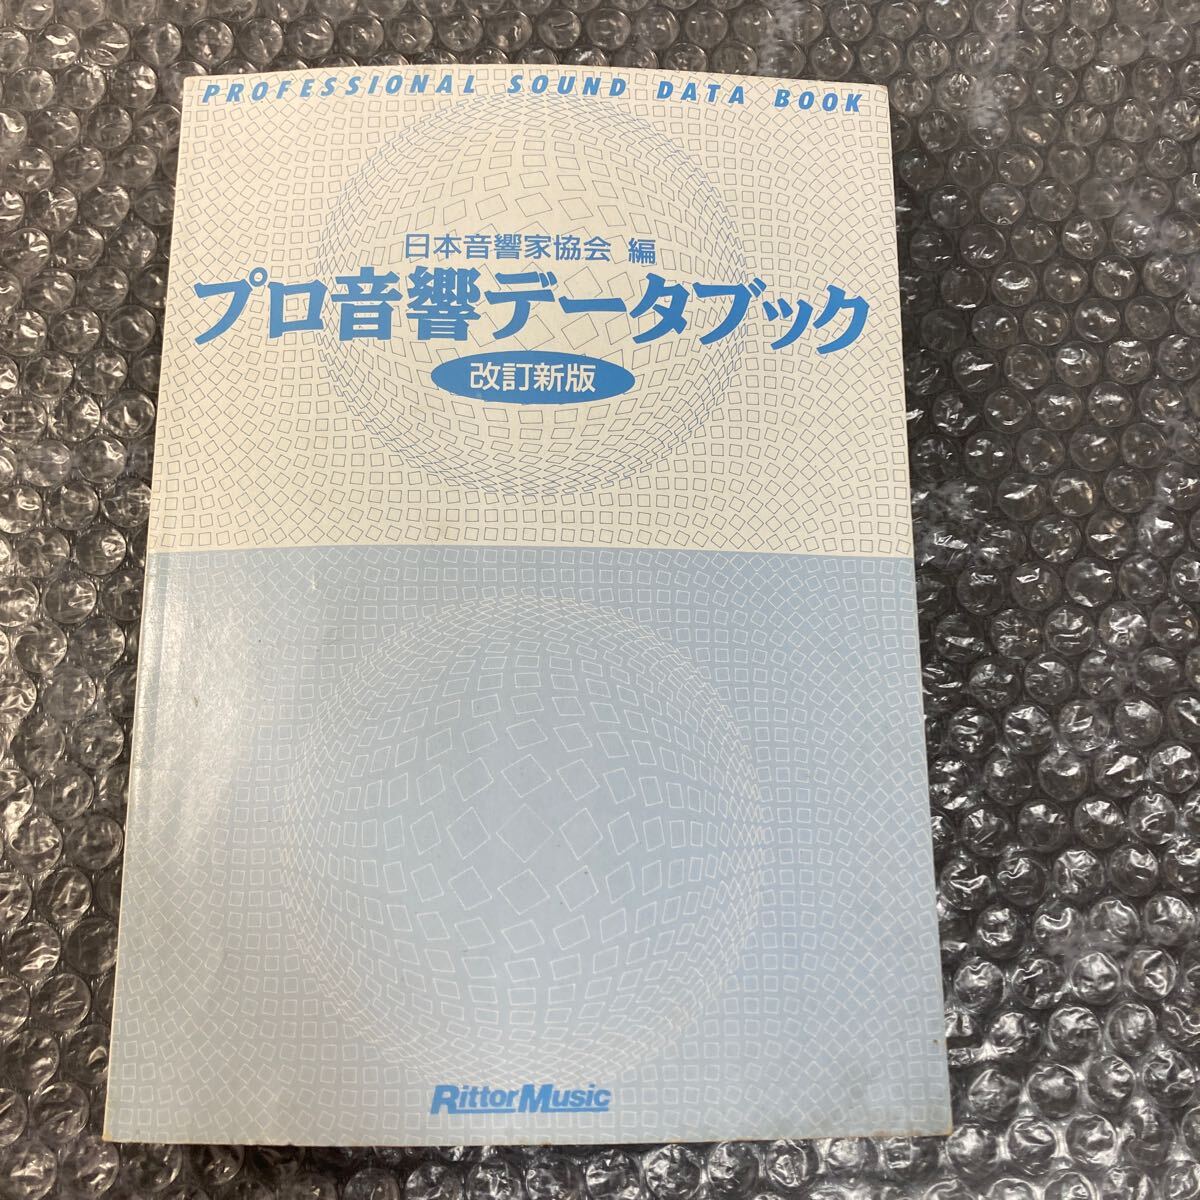  publication Pro sound data book modified . new version Japan sound house association compilation lito- music cover cover none 